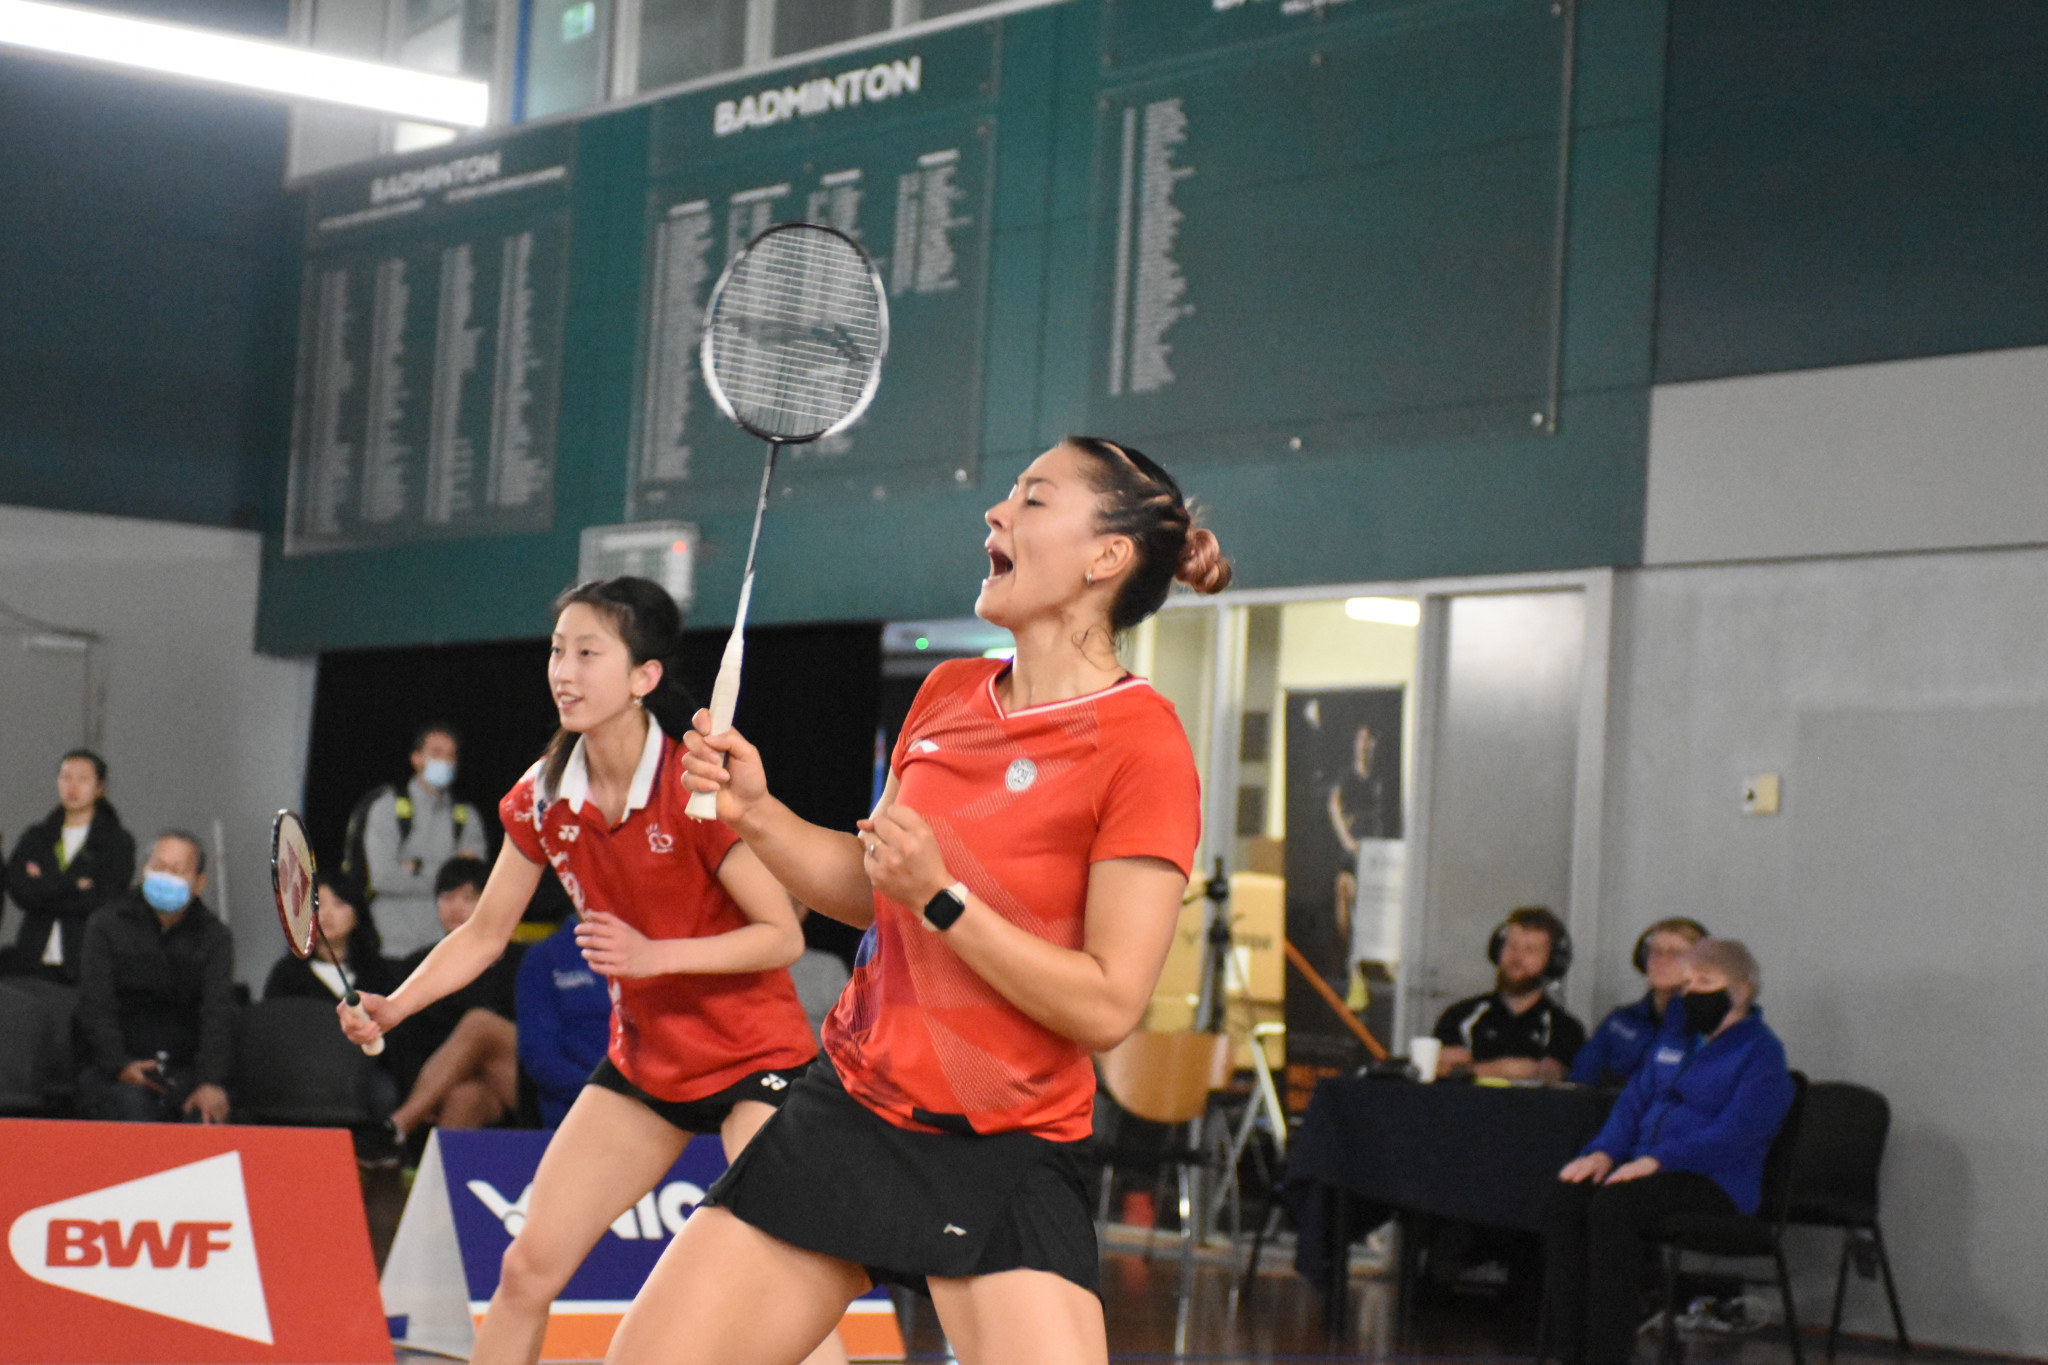 Kaitlyn Ea and Gronya Somerville were defeated in the women's doubles final at the Oceania Badminton Championships by fellow Australians Joyce Choong and Sylvina Kurniawan ©Badminton Oceania